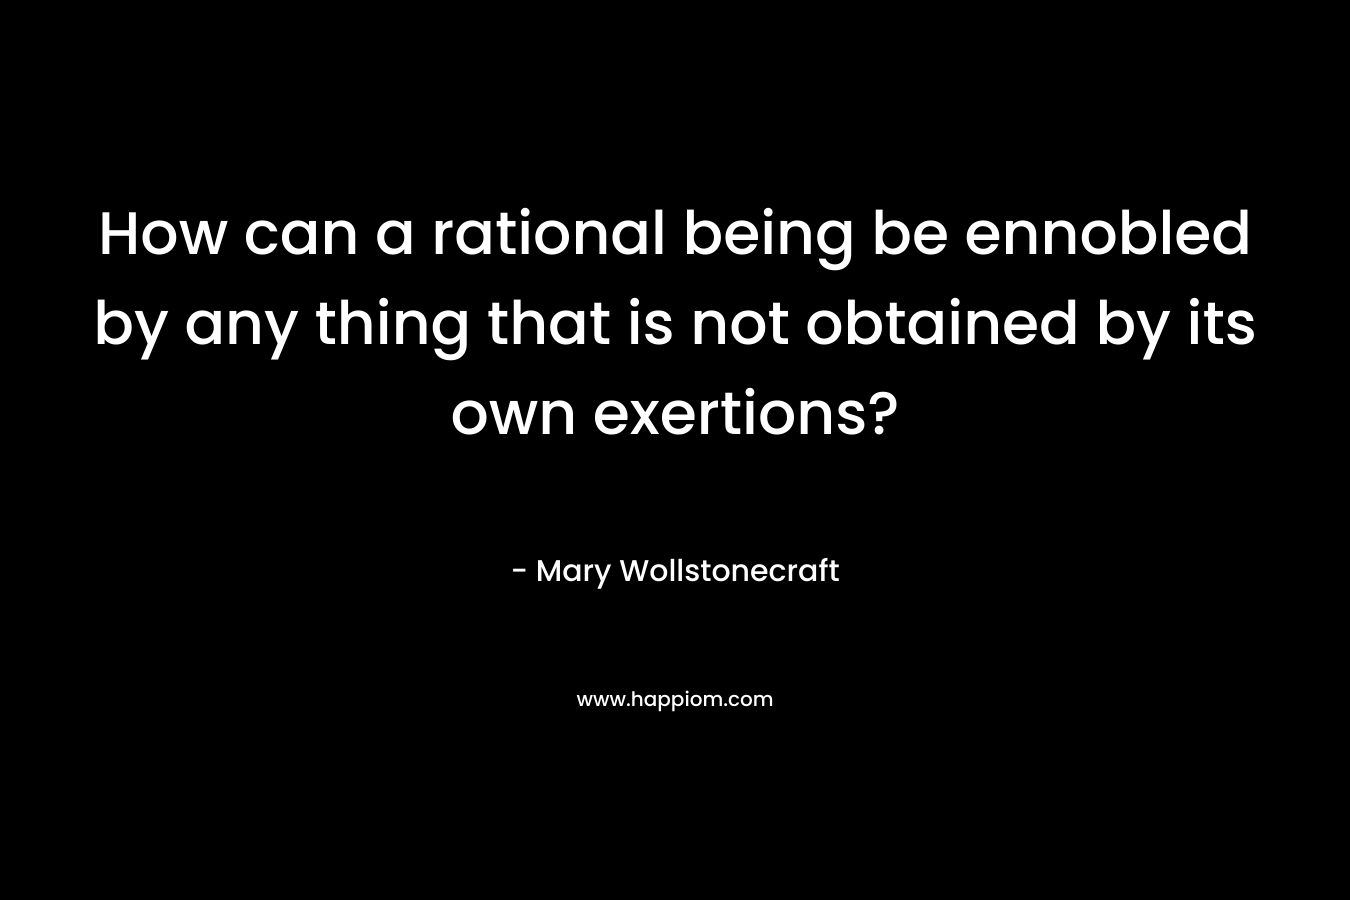 How can a rational being be ennobled by any thing that is not obtained by its own exertions? – Mary Wollstonecraft